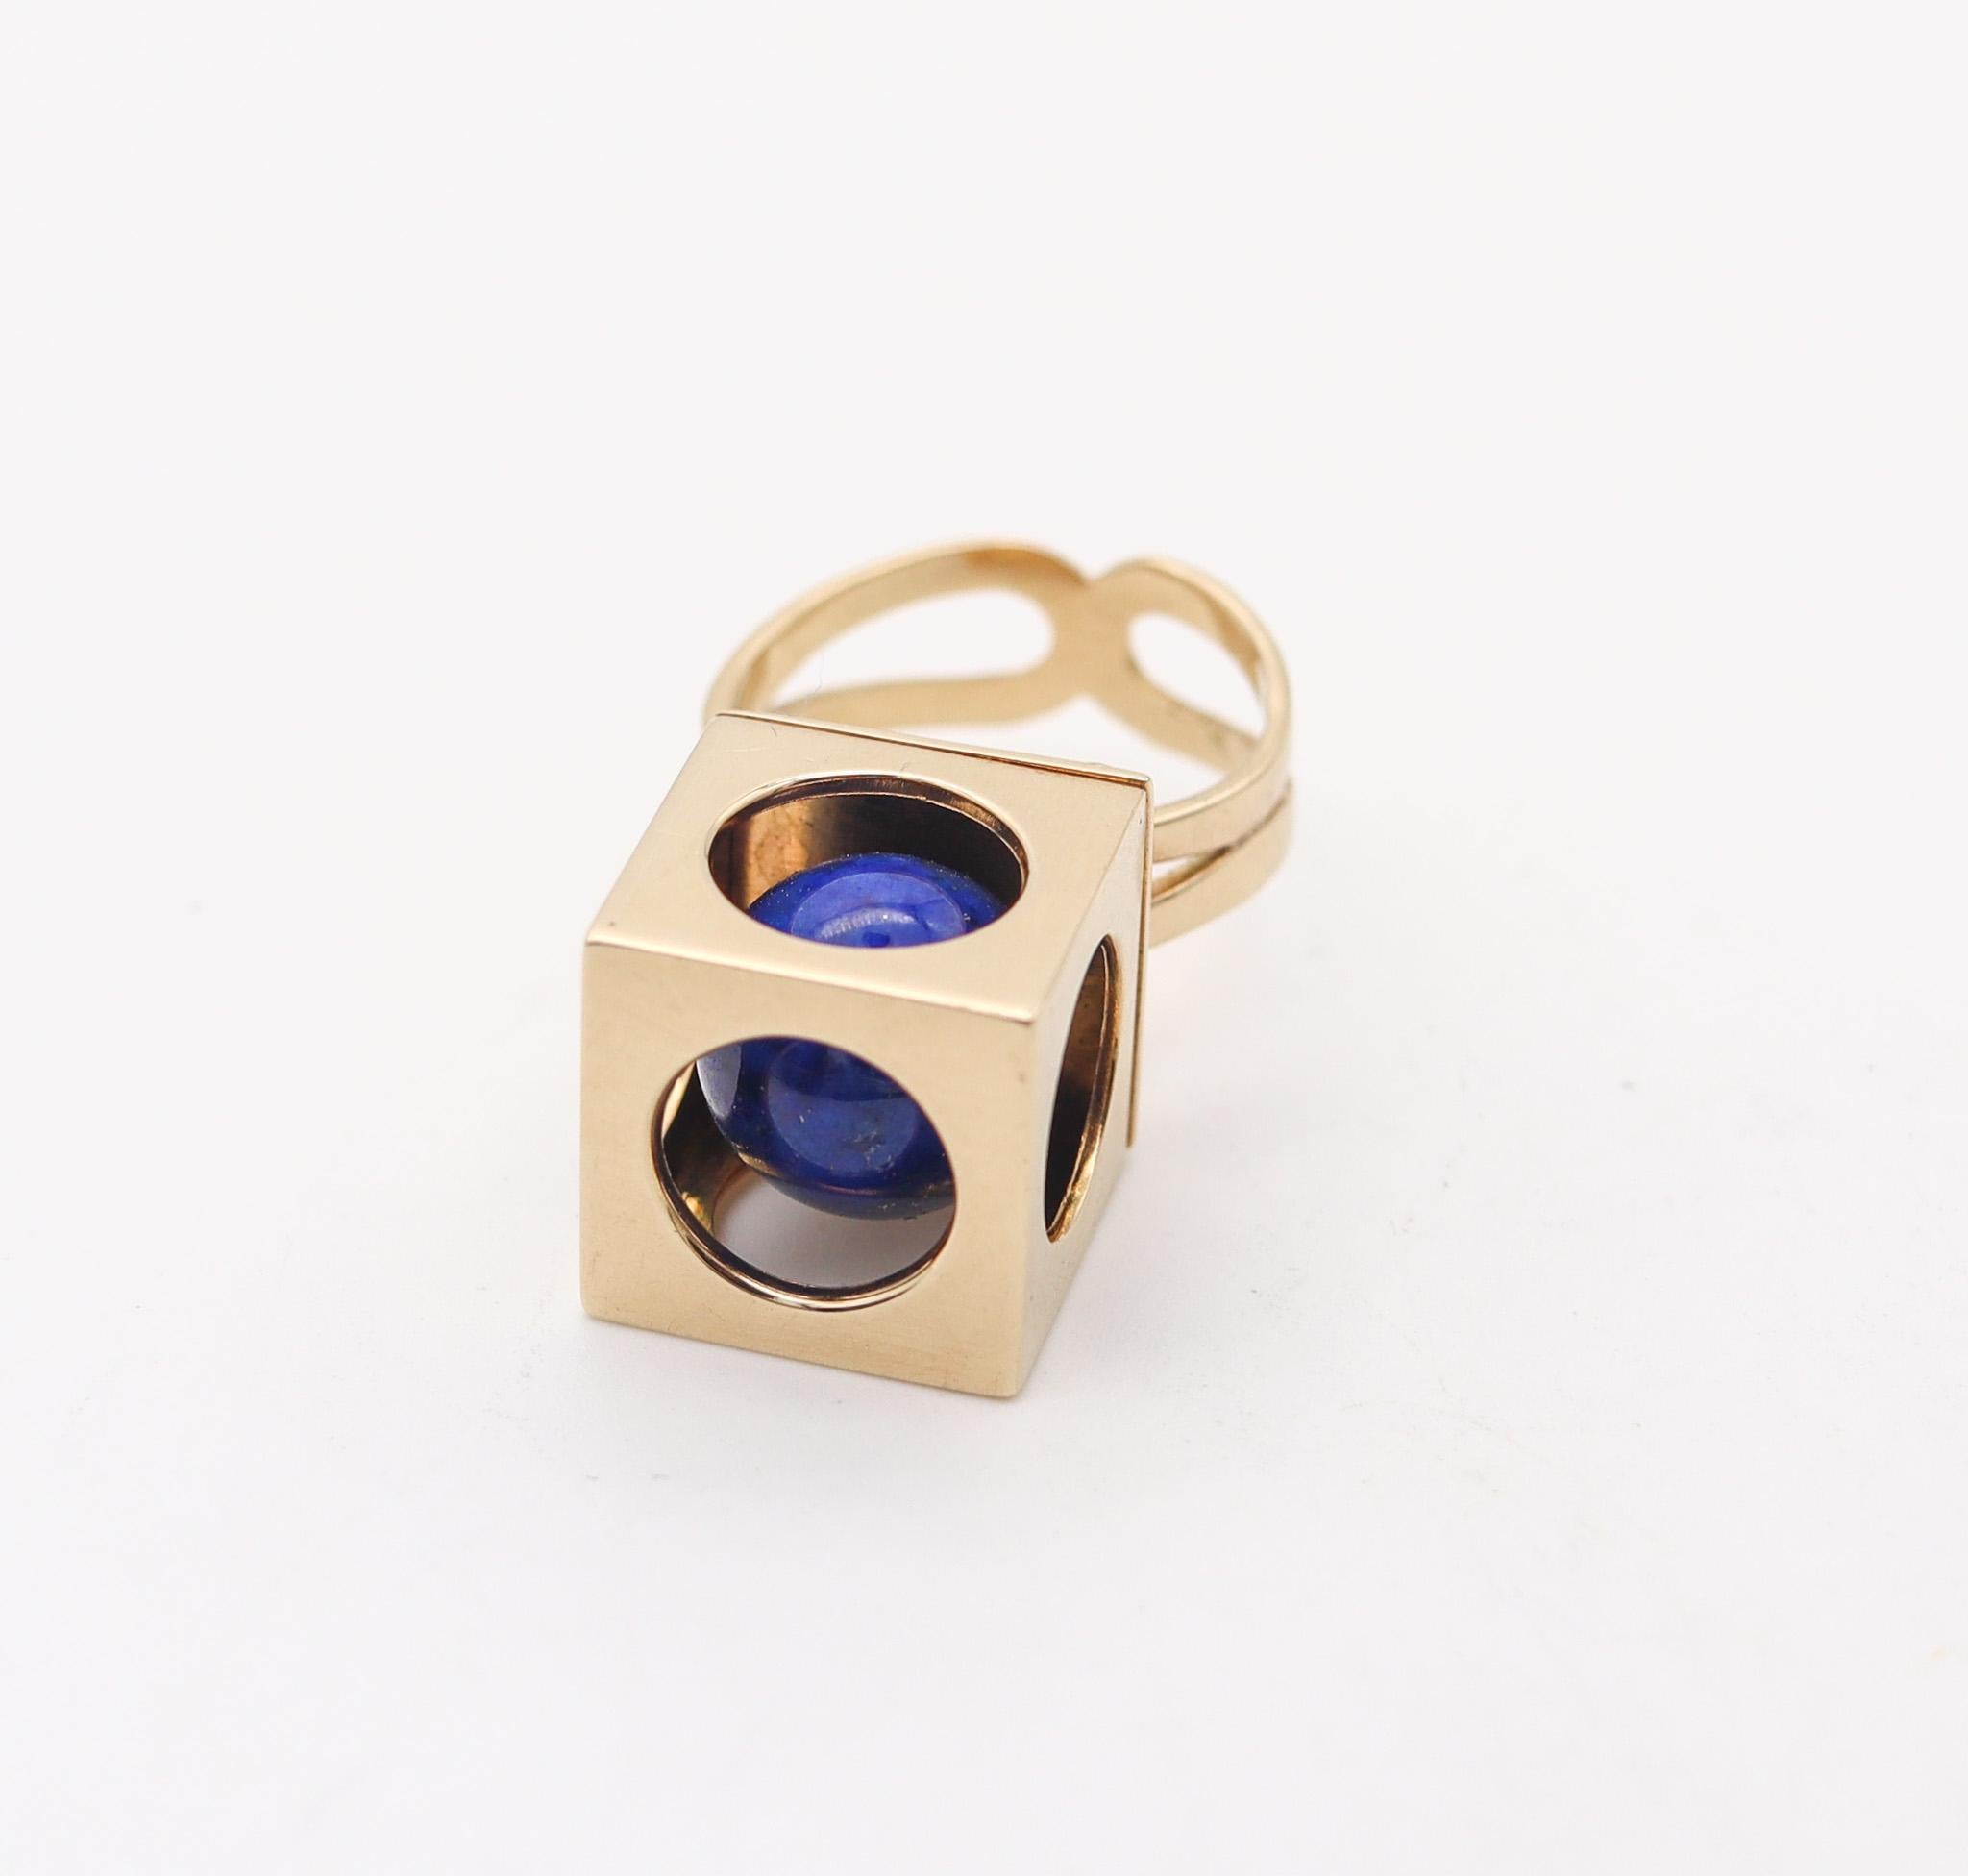 European Modernist 1970 Sculptural Ring In 14Kt Yellow Gold With Lapis Lazuli In Excellent Condition For Sale In Miami, FL